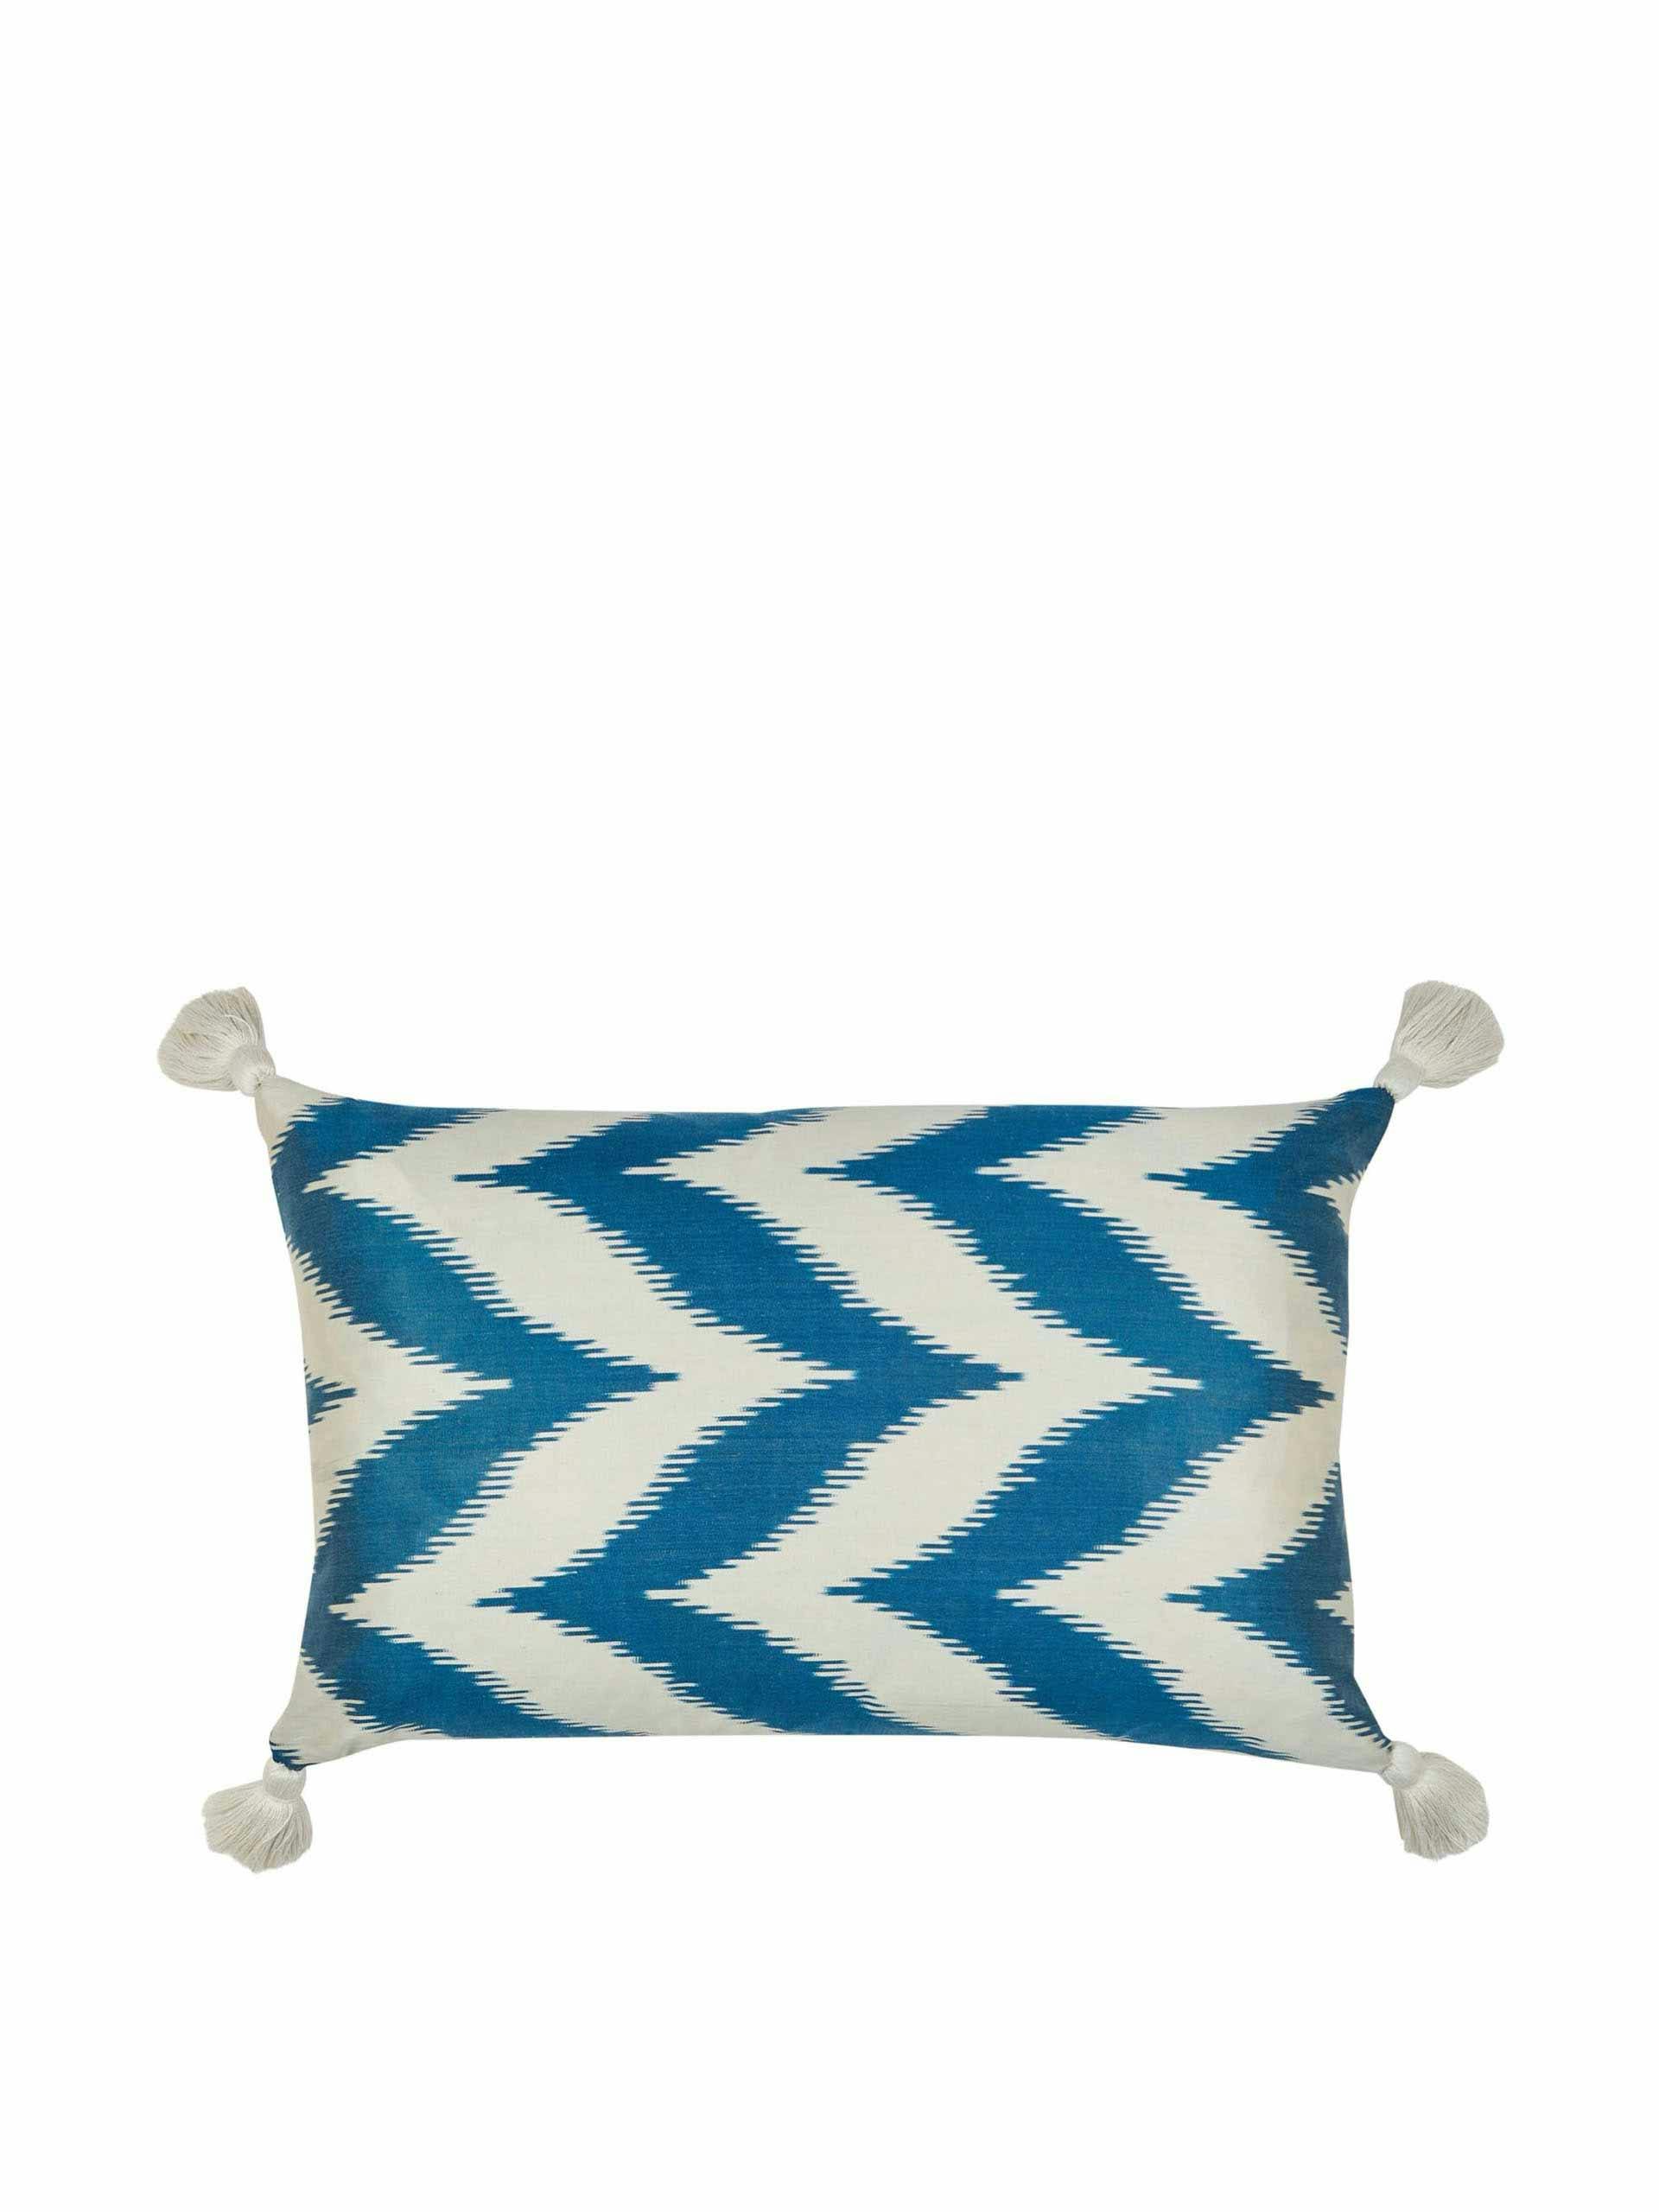 Limited edition wide blue zig zag silk cushion with natural linen reverse and white tassels